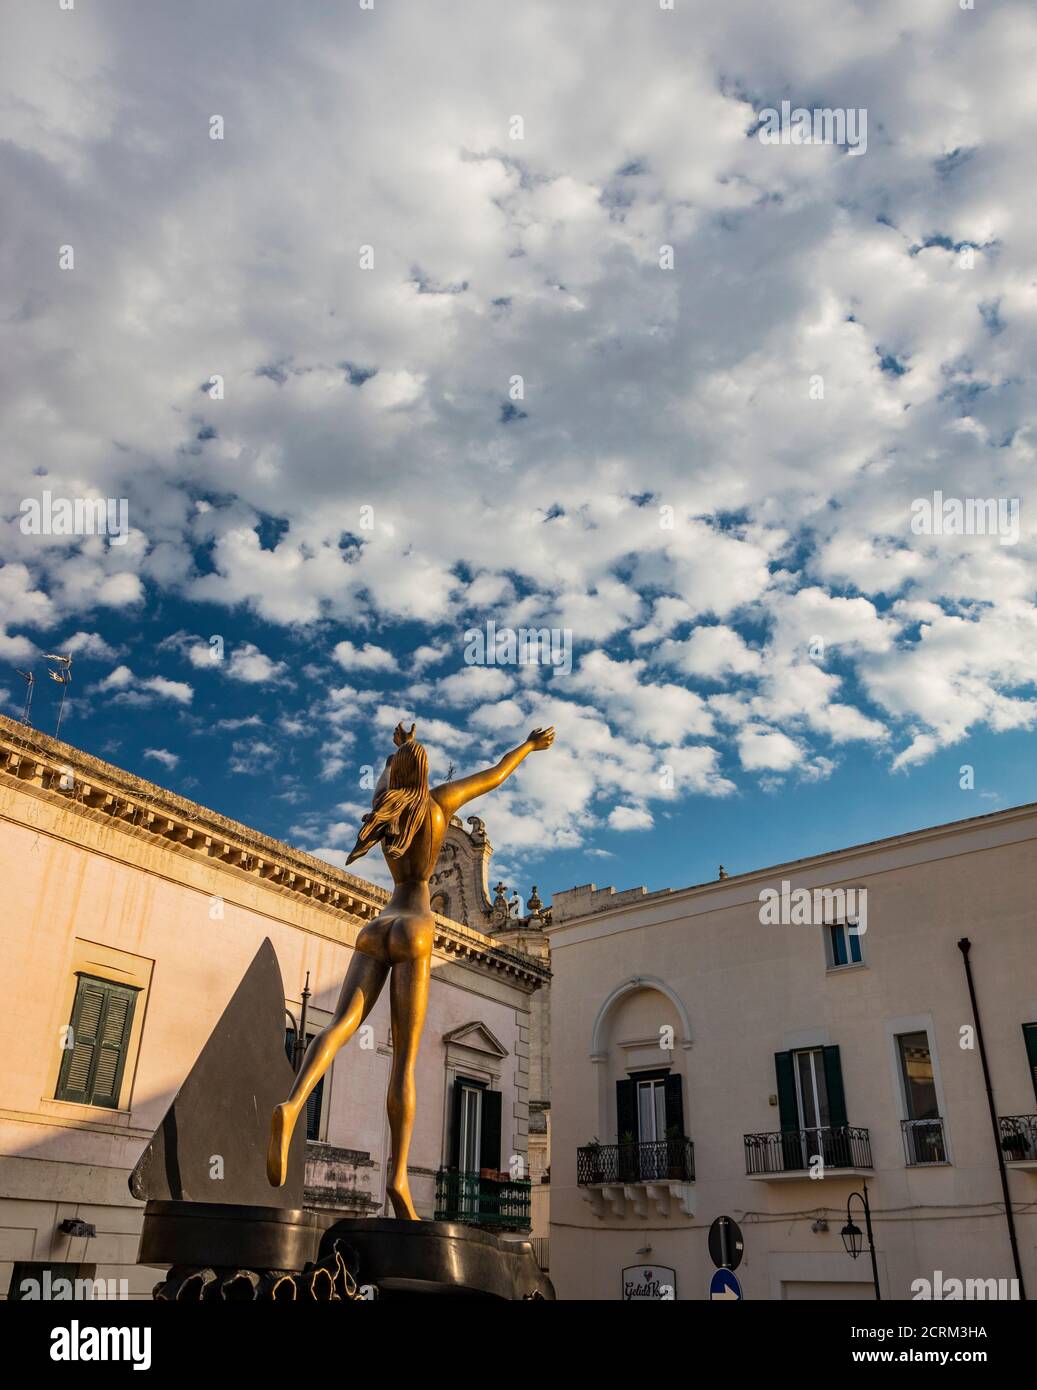 August 8, 2020 - Matera, Basilicata, Italy - Salvador Dalì's sculpture: the Dancing Piano, in San Francesco d'Assisi square. Woman with arms raised to Stock Photo